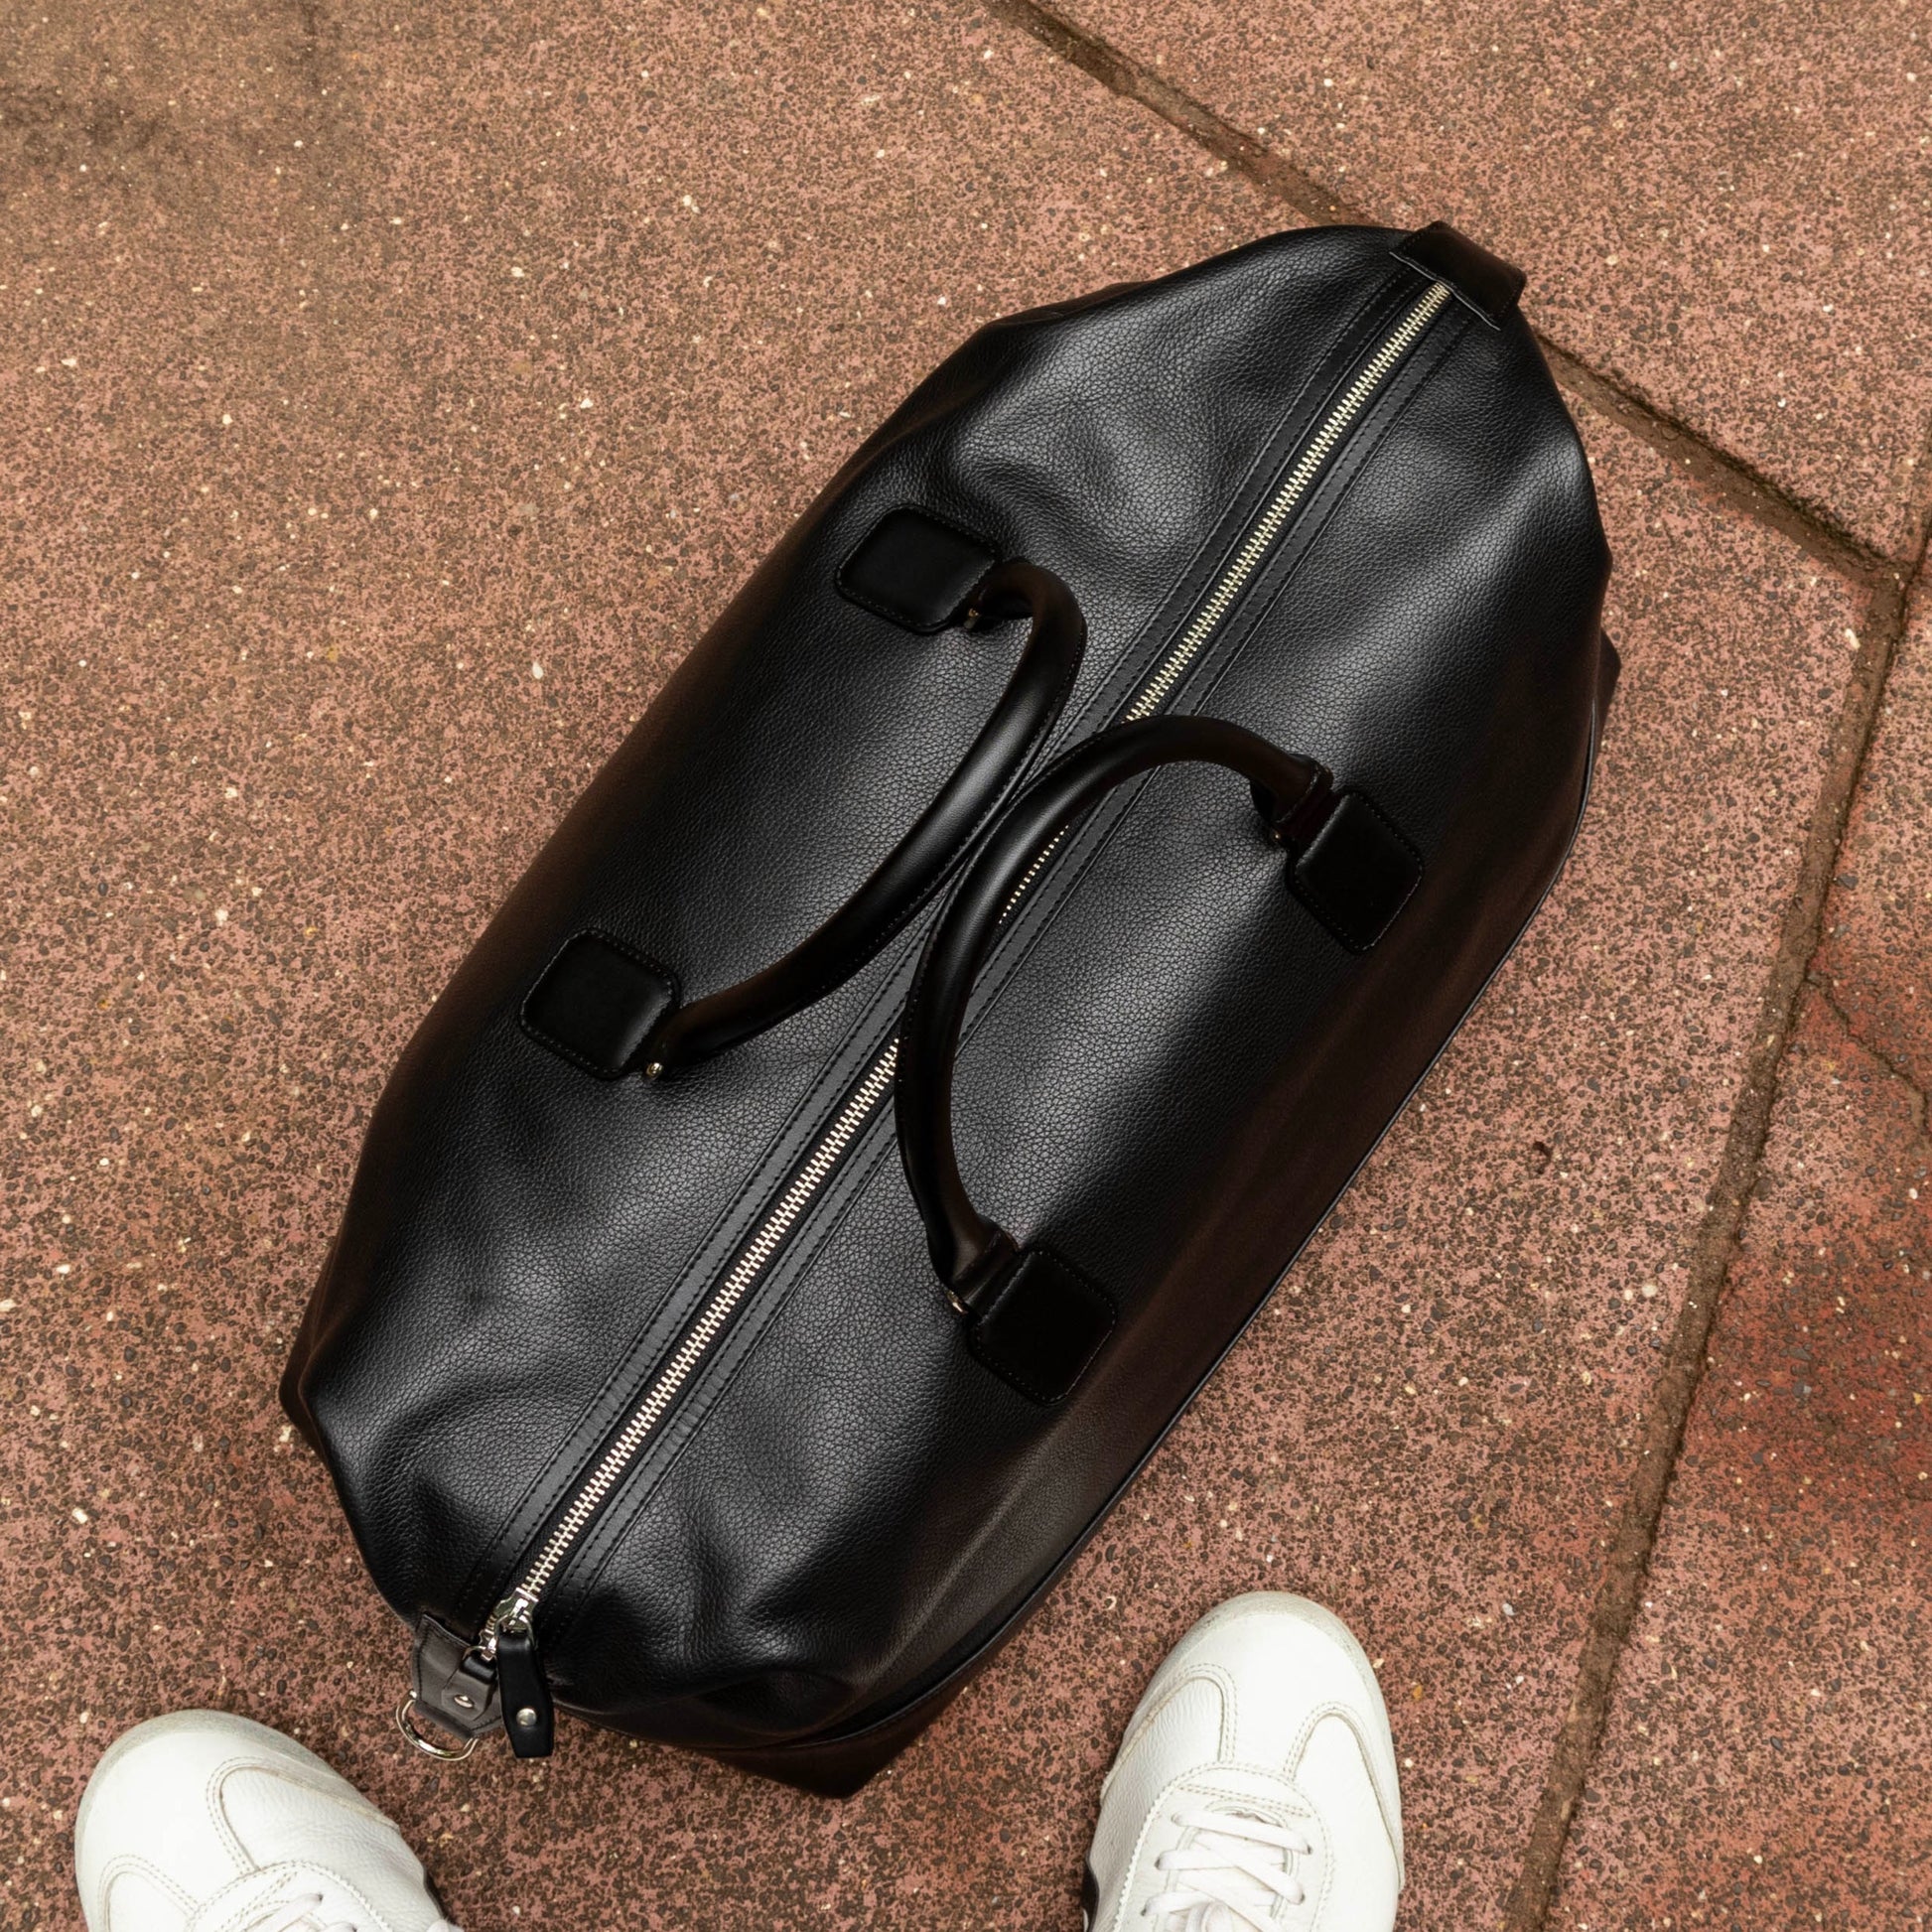 Leather Duffle Bag as viewed from top. Visible in the image are top zippers. We use YKK metallic zippers for a long life